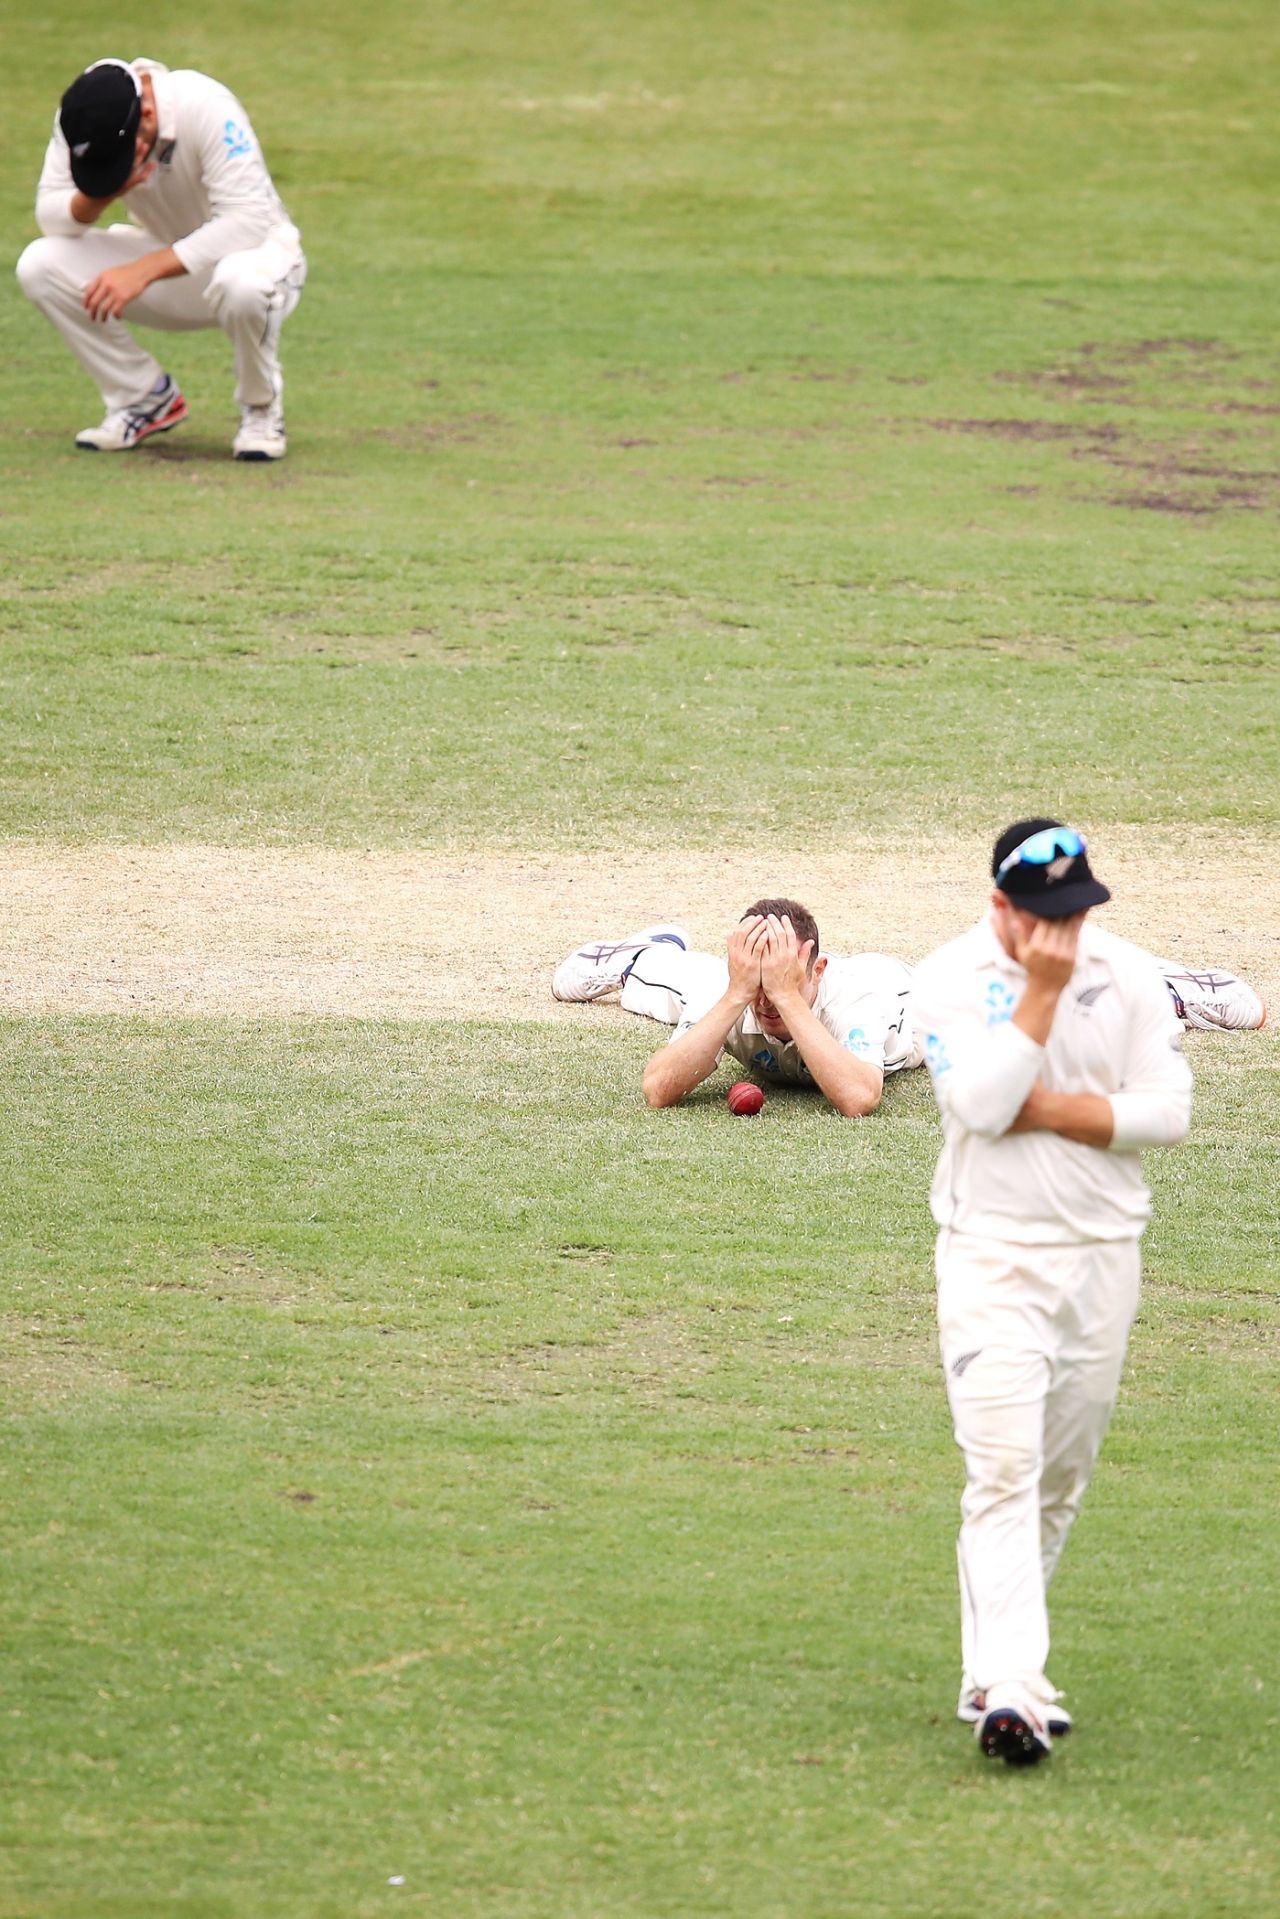 Tom Blundell, Todd Astle and Tom Latham are dejected after Astle drops Marnus Labuschagne, Australia v New Zealand, 3rd Test, Sydney, 4th day, January 6, 2020